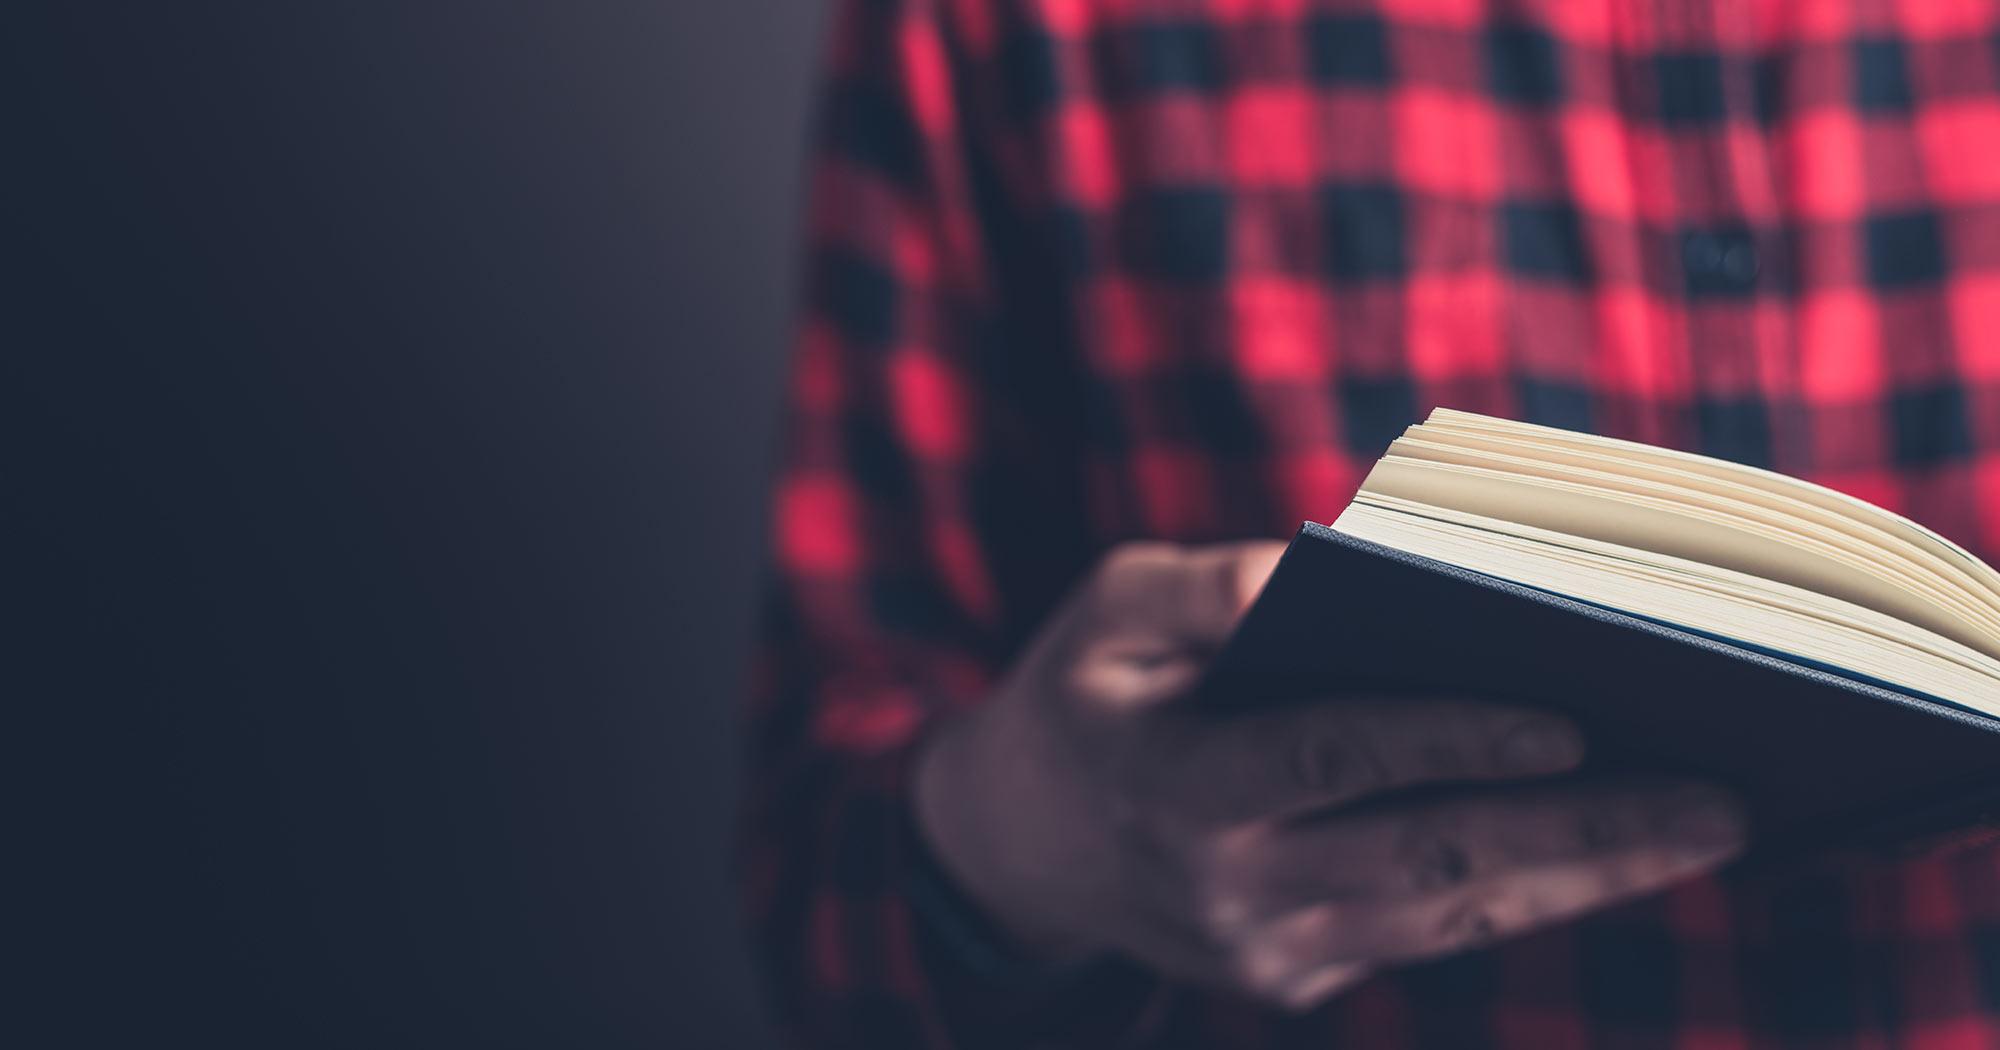 12 Ecommerce Books Every Retail Business Owner Should Read in 2019